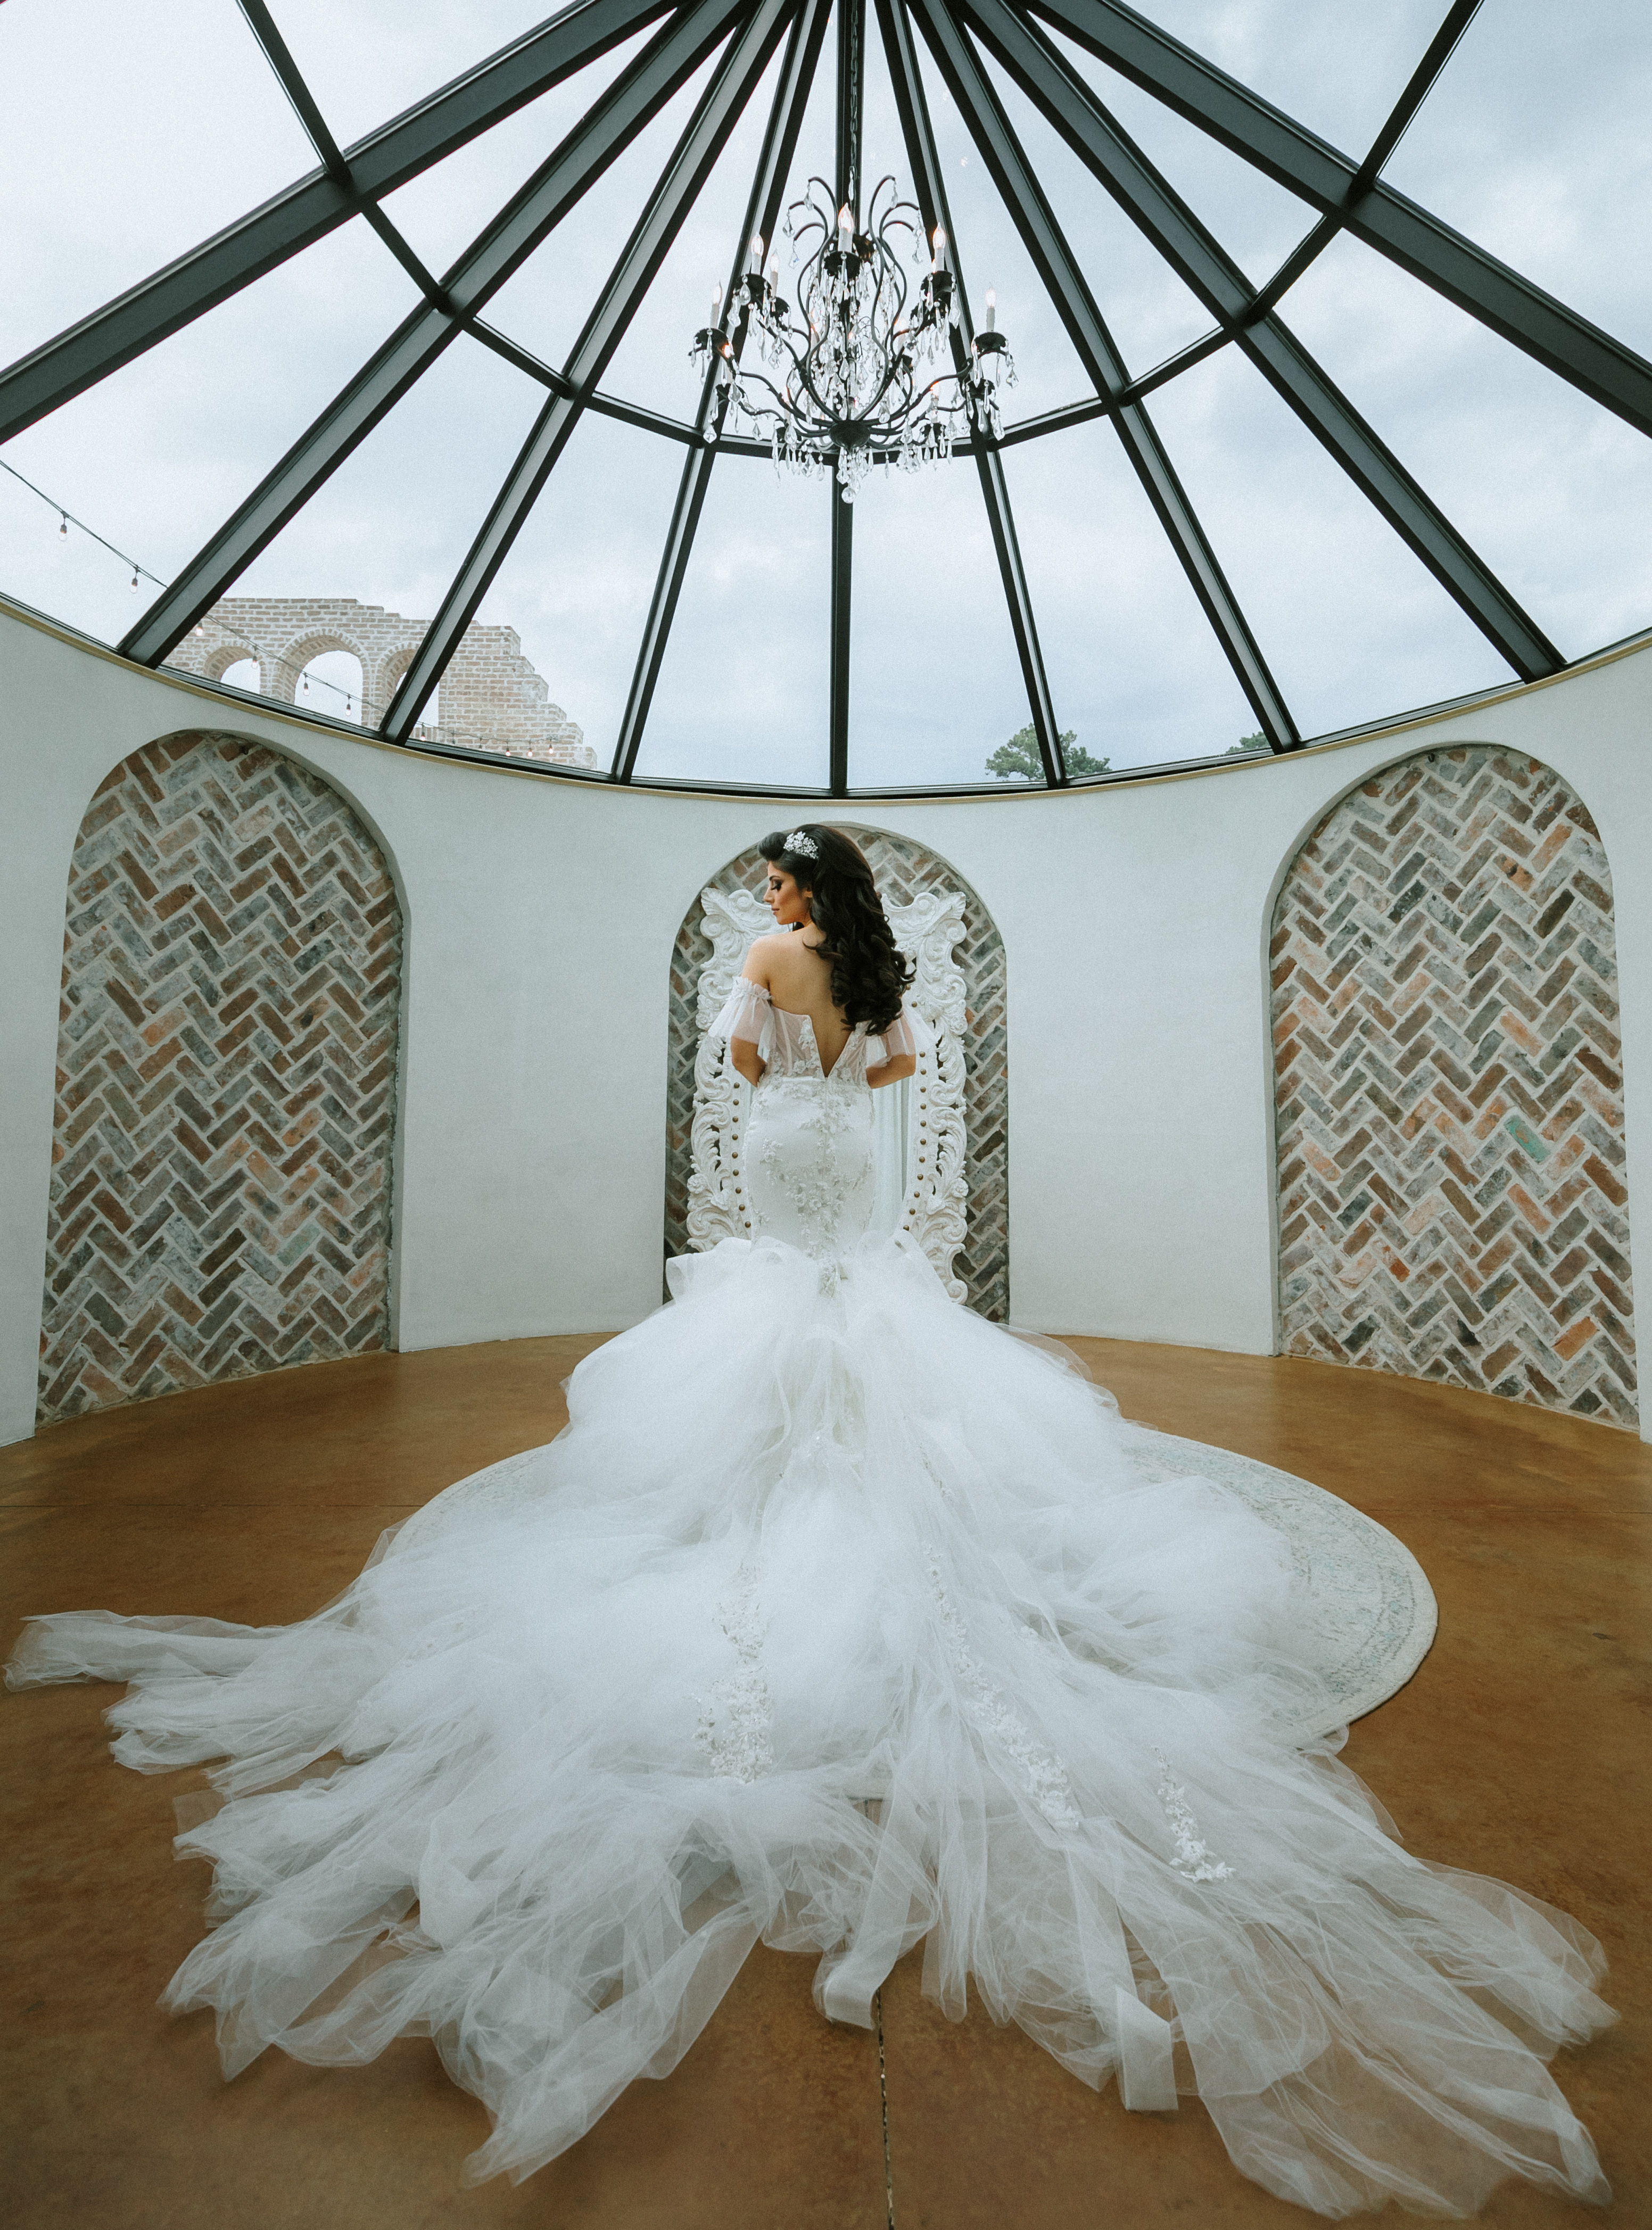 A bride stands in the bridal suite in her wedding dress that has a trailing veil.